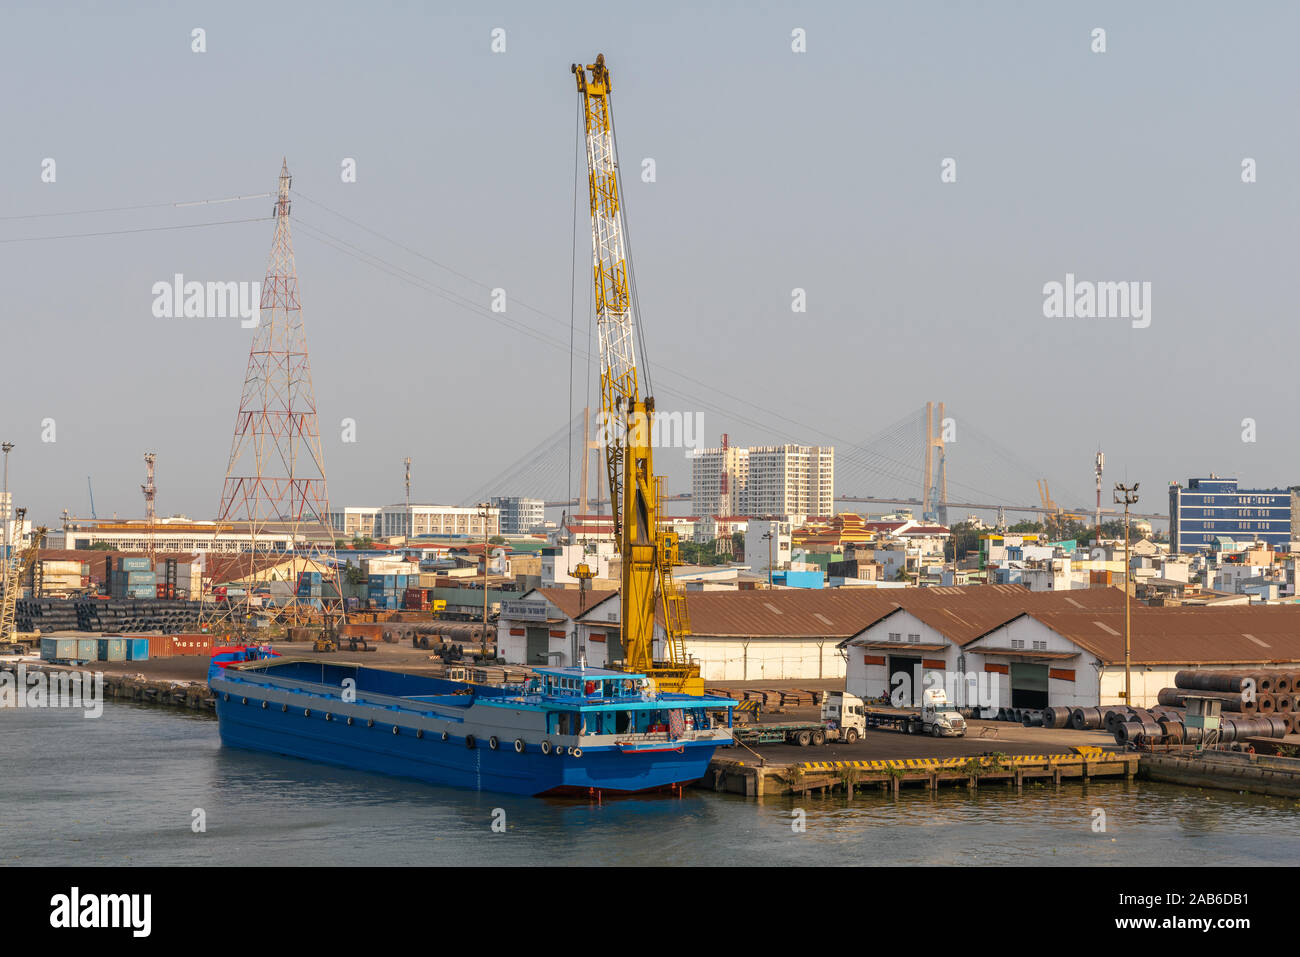 Ho Chi Minh City, Vietnam - March 13, 2019: Tan Thuan port on Song Sai Gon river at sunset. Blue new wide barge with empty flat bed trucks and huge Li Stock Photo